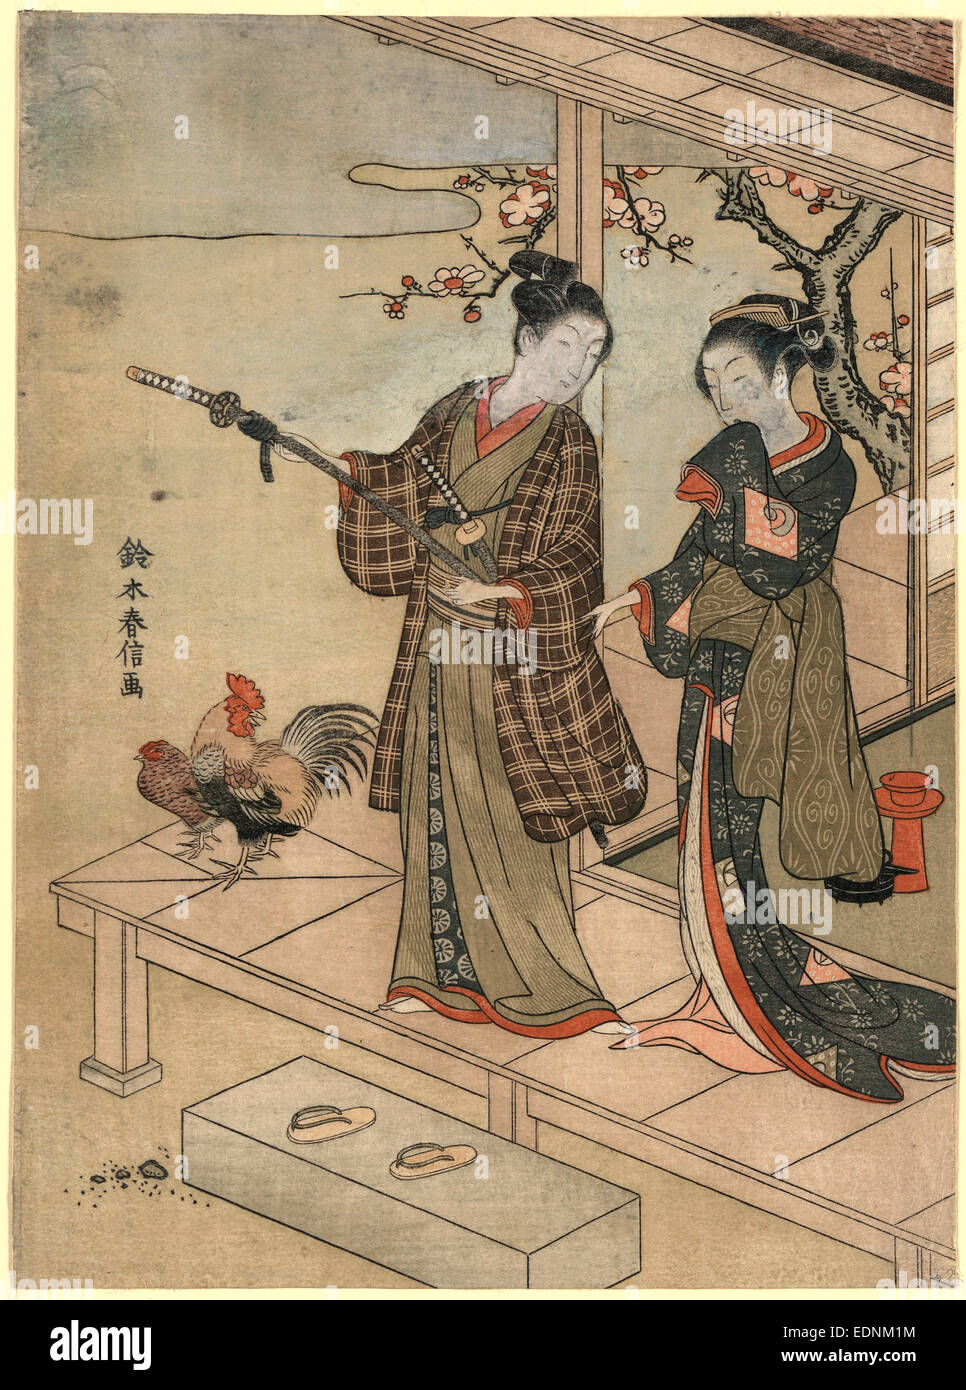 Engawa no wakashu to onna, A young dandy and a woman on a veranda., Suzuki, Harunobu, 1725?-1770, artist, [between 1767 and 1769], 1 print : woodcut, color ; 28.3 x 20.9 cm., Print shows a young man and a young woman standing on a veranda, with a rooster and a hen standing nearby. Stock Photo